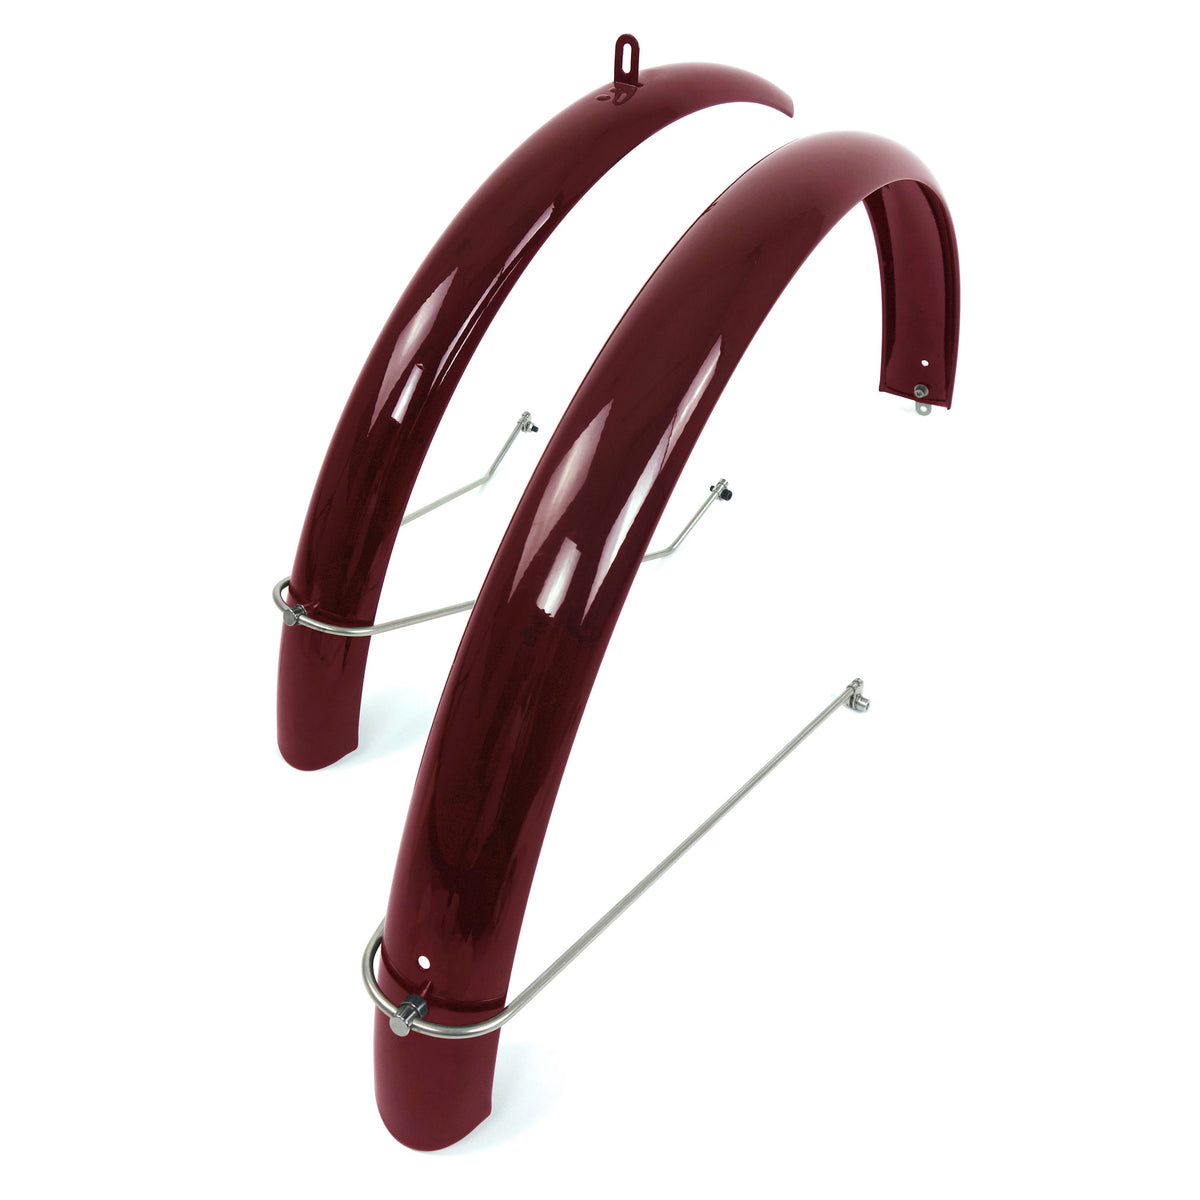 Alloy bicycel mudguard set painted in a rich burgundy. Feature s stainless steel mudguard fittings.